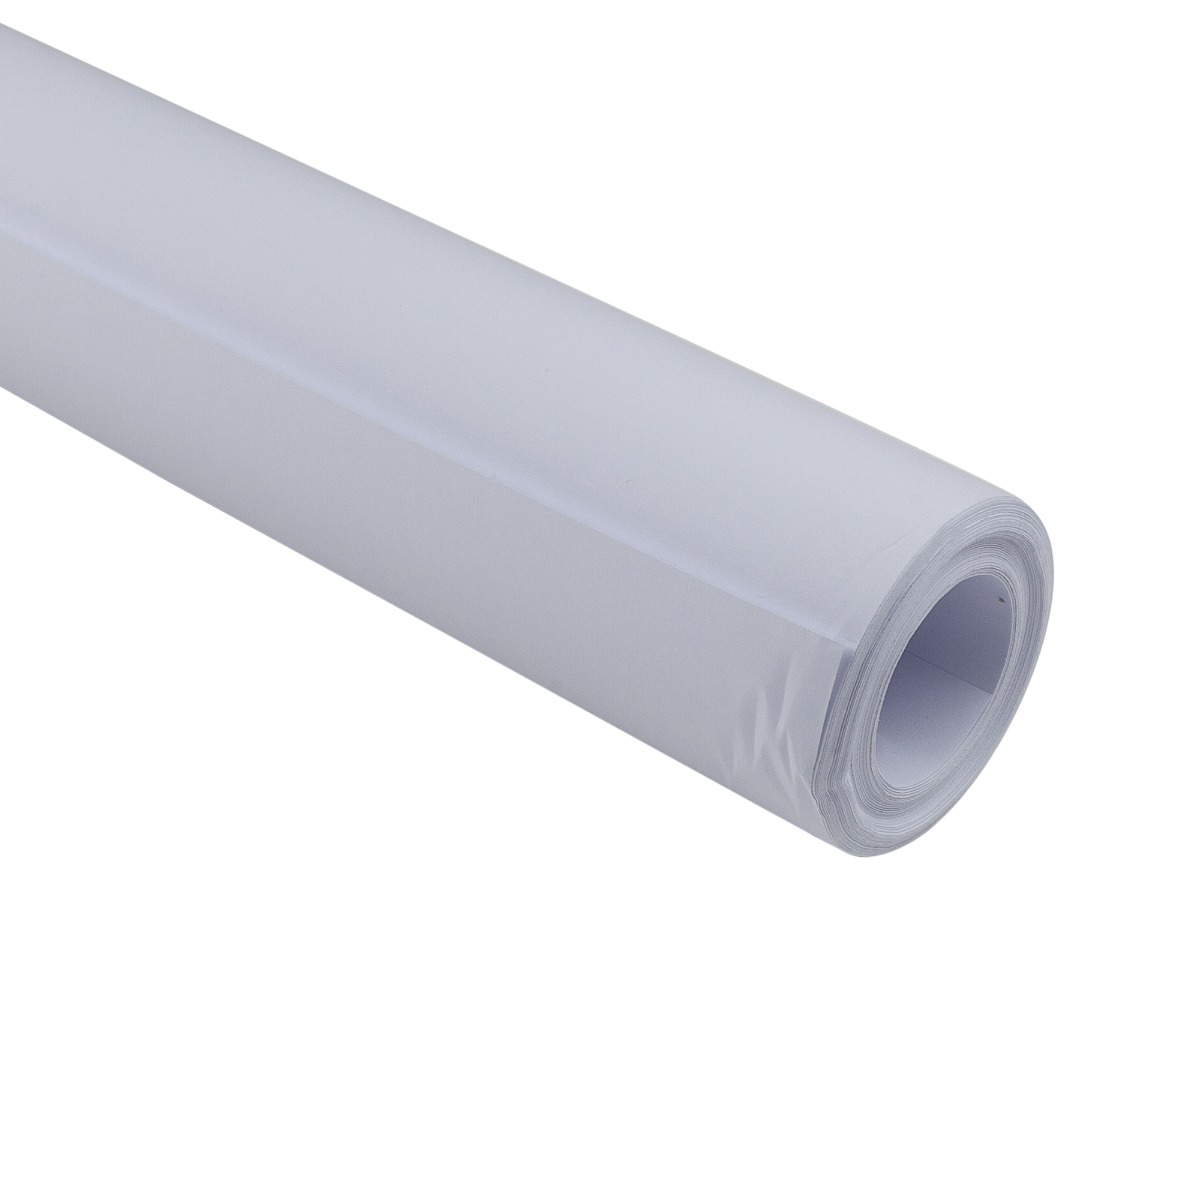 Fadeless Roll Exw White 1218mm X 15M 85 gsm